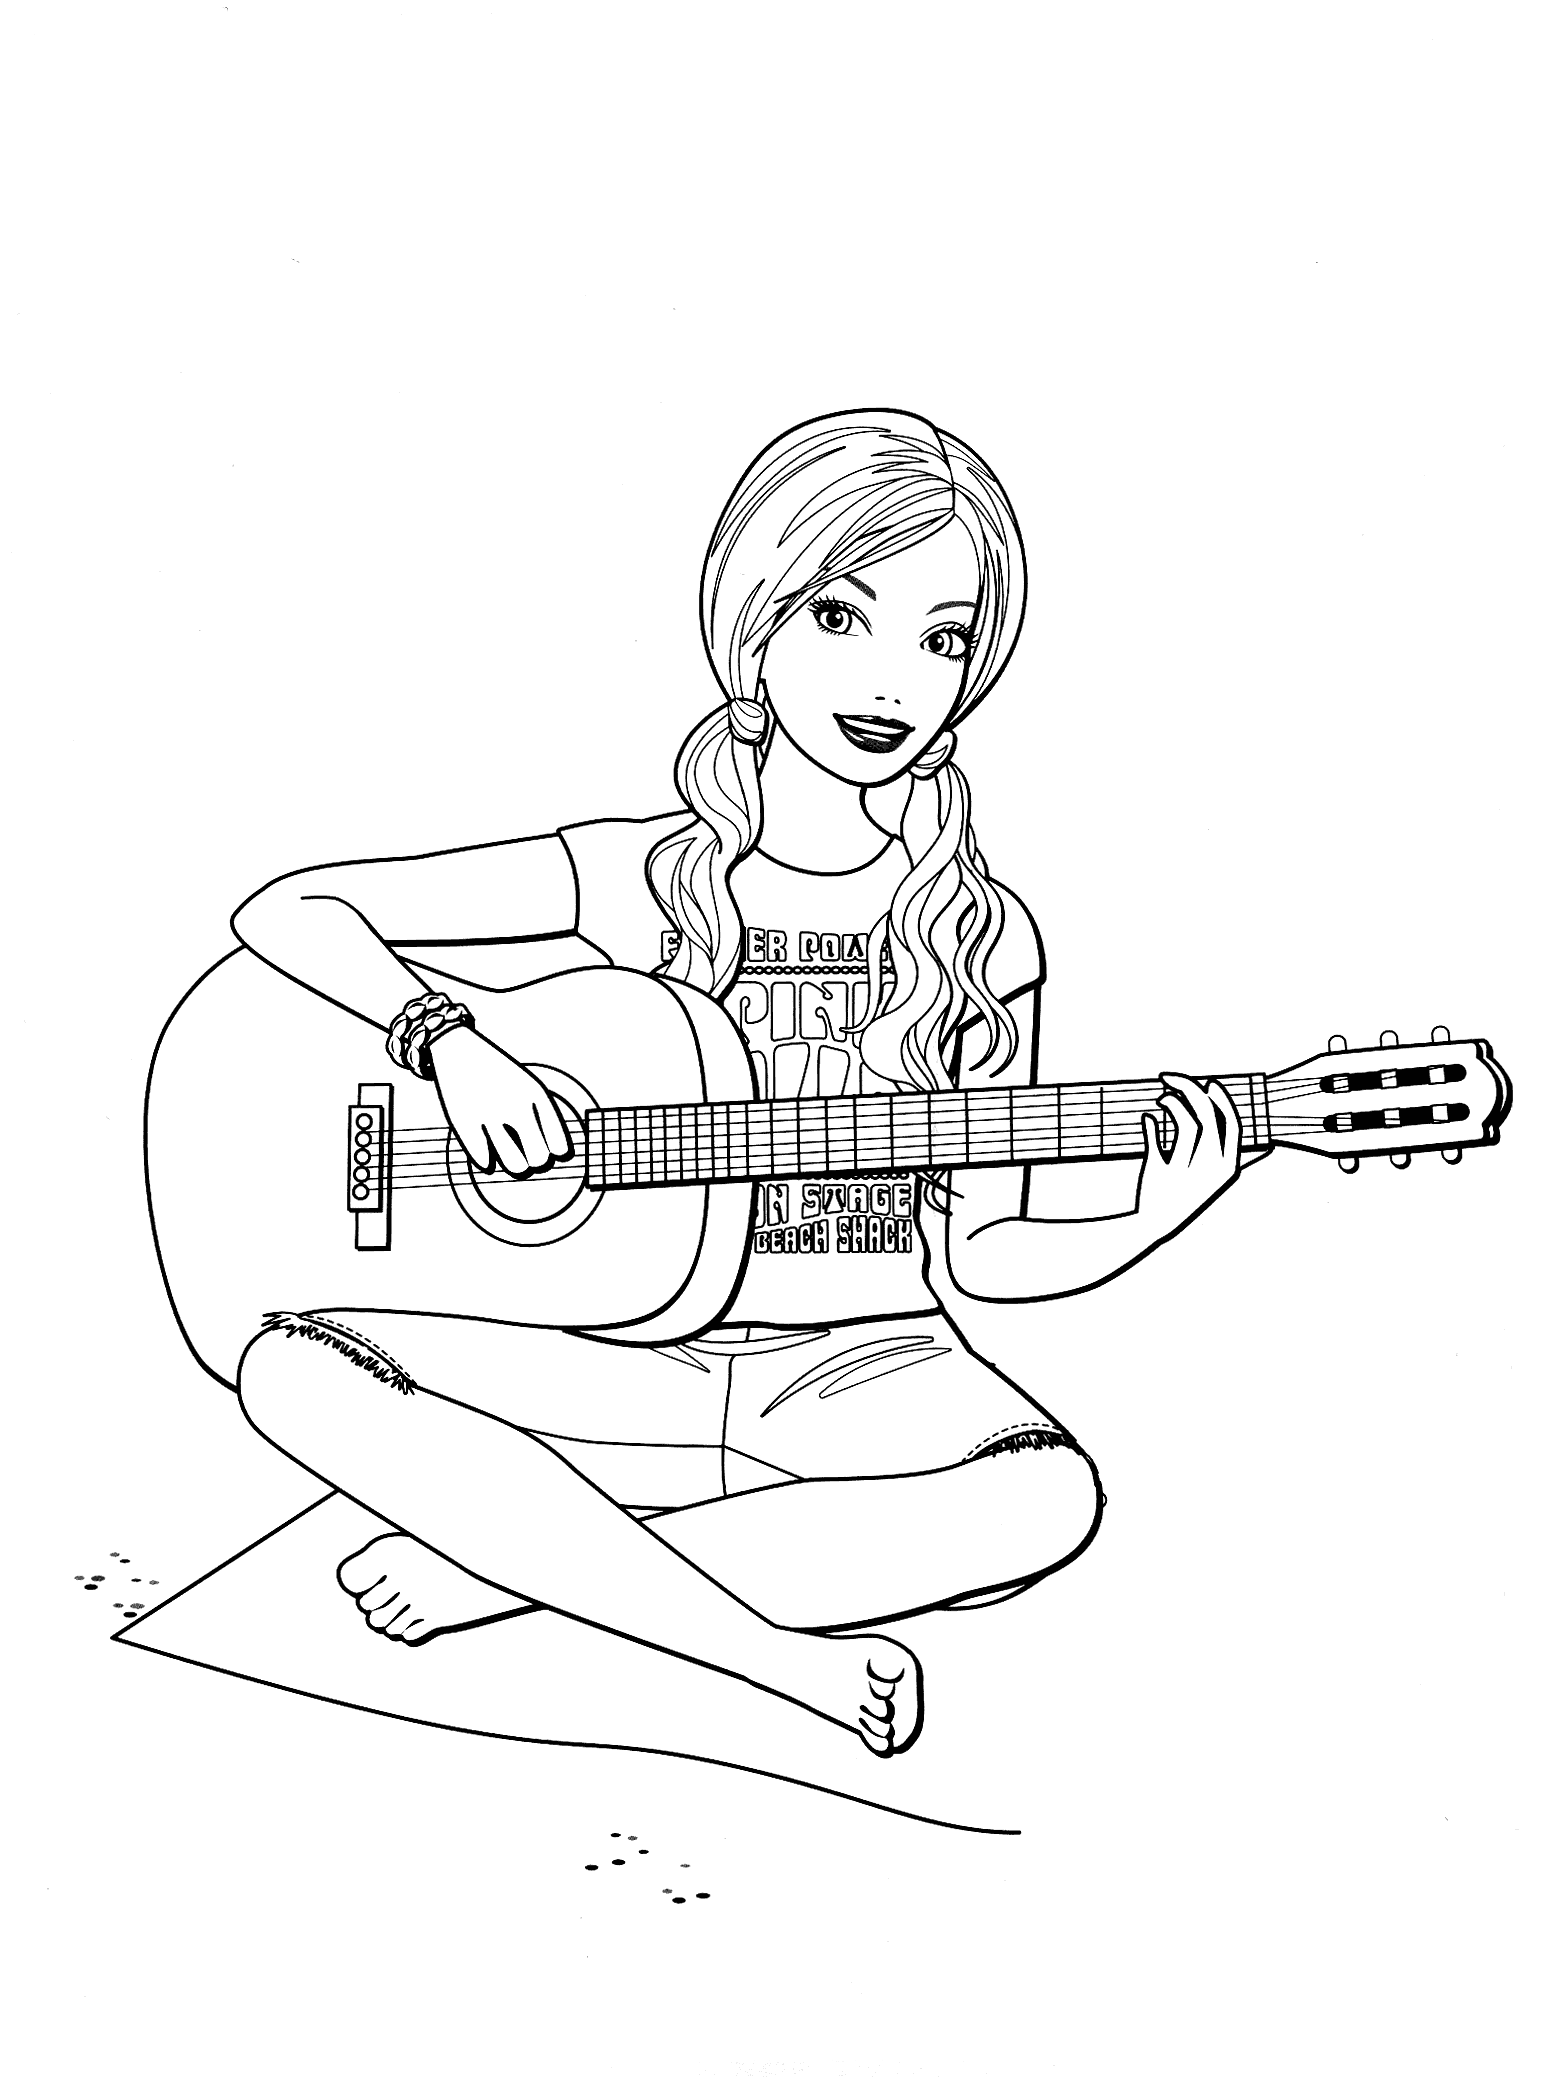 Coloring page - Barbie with guitar